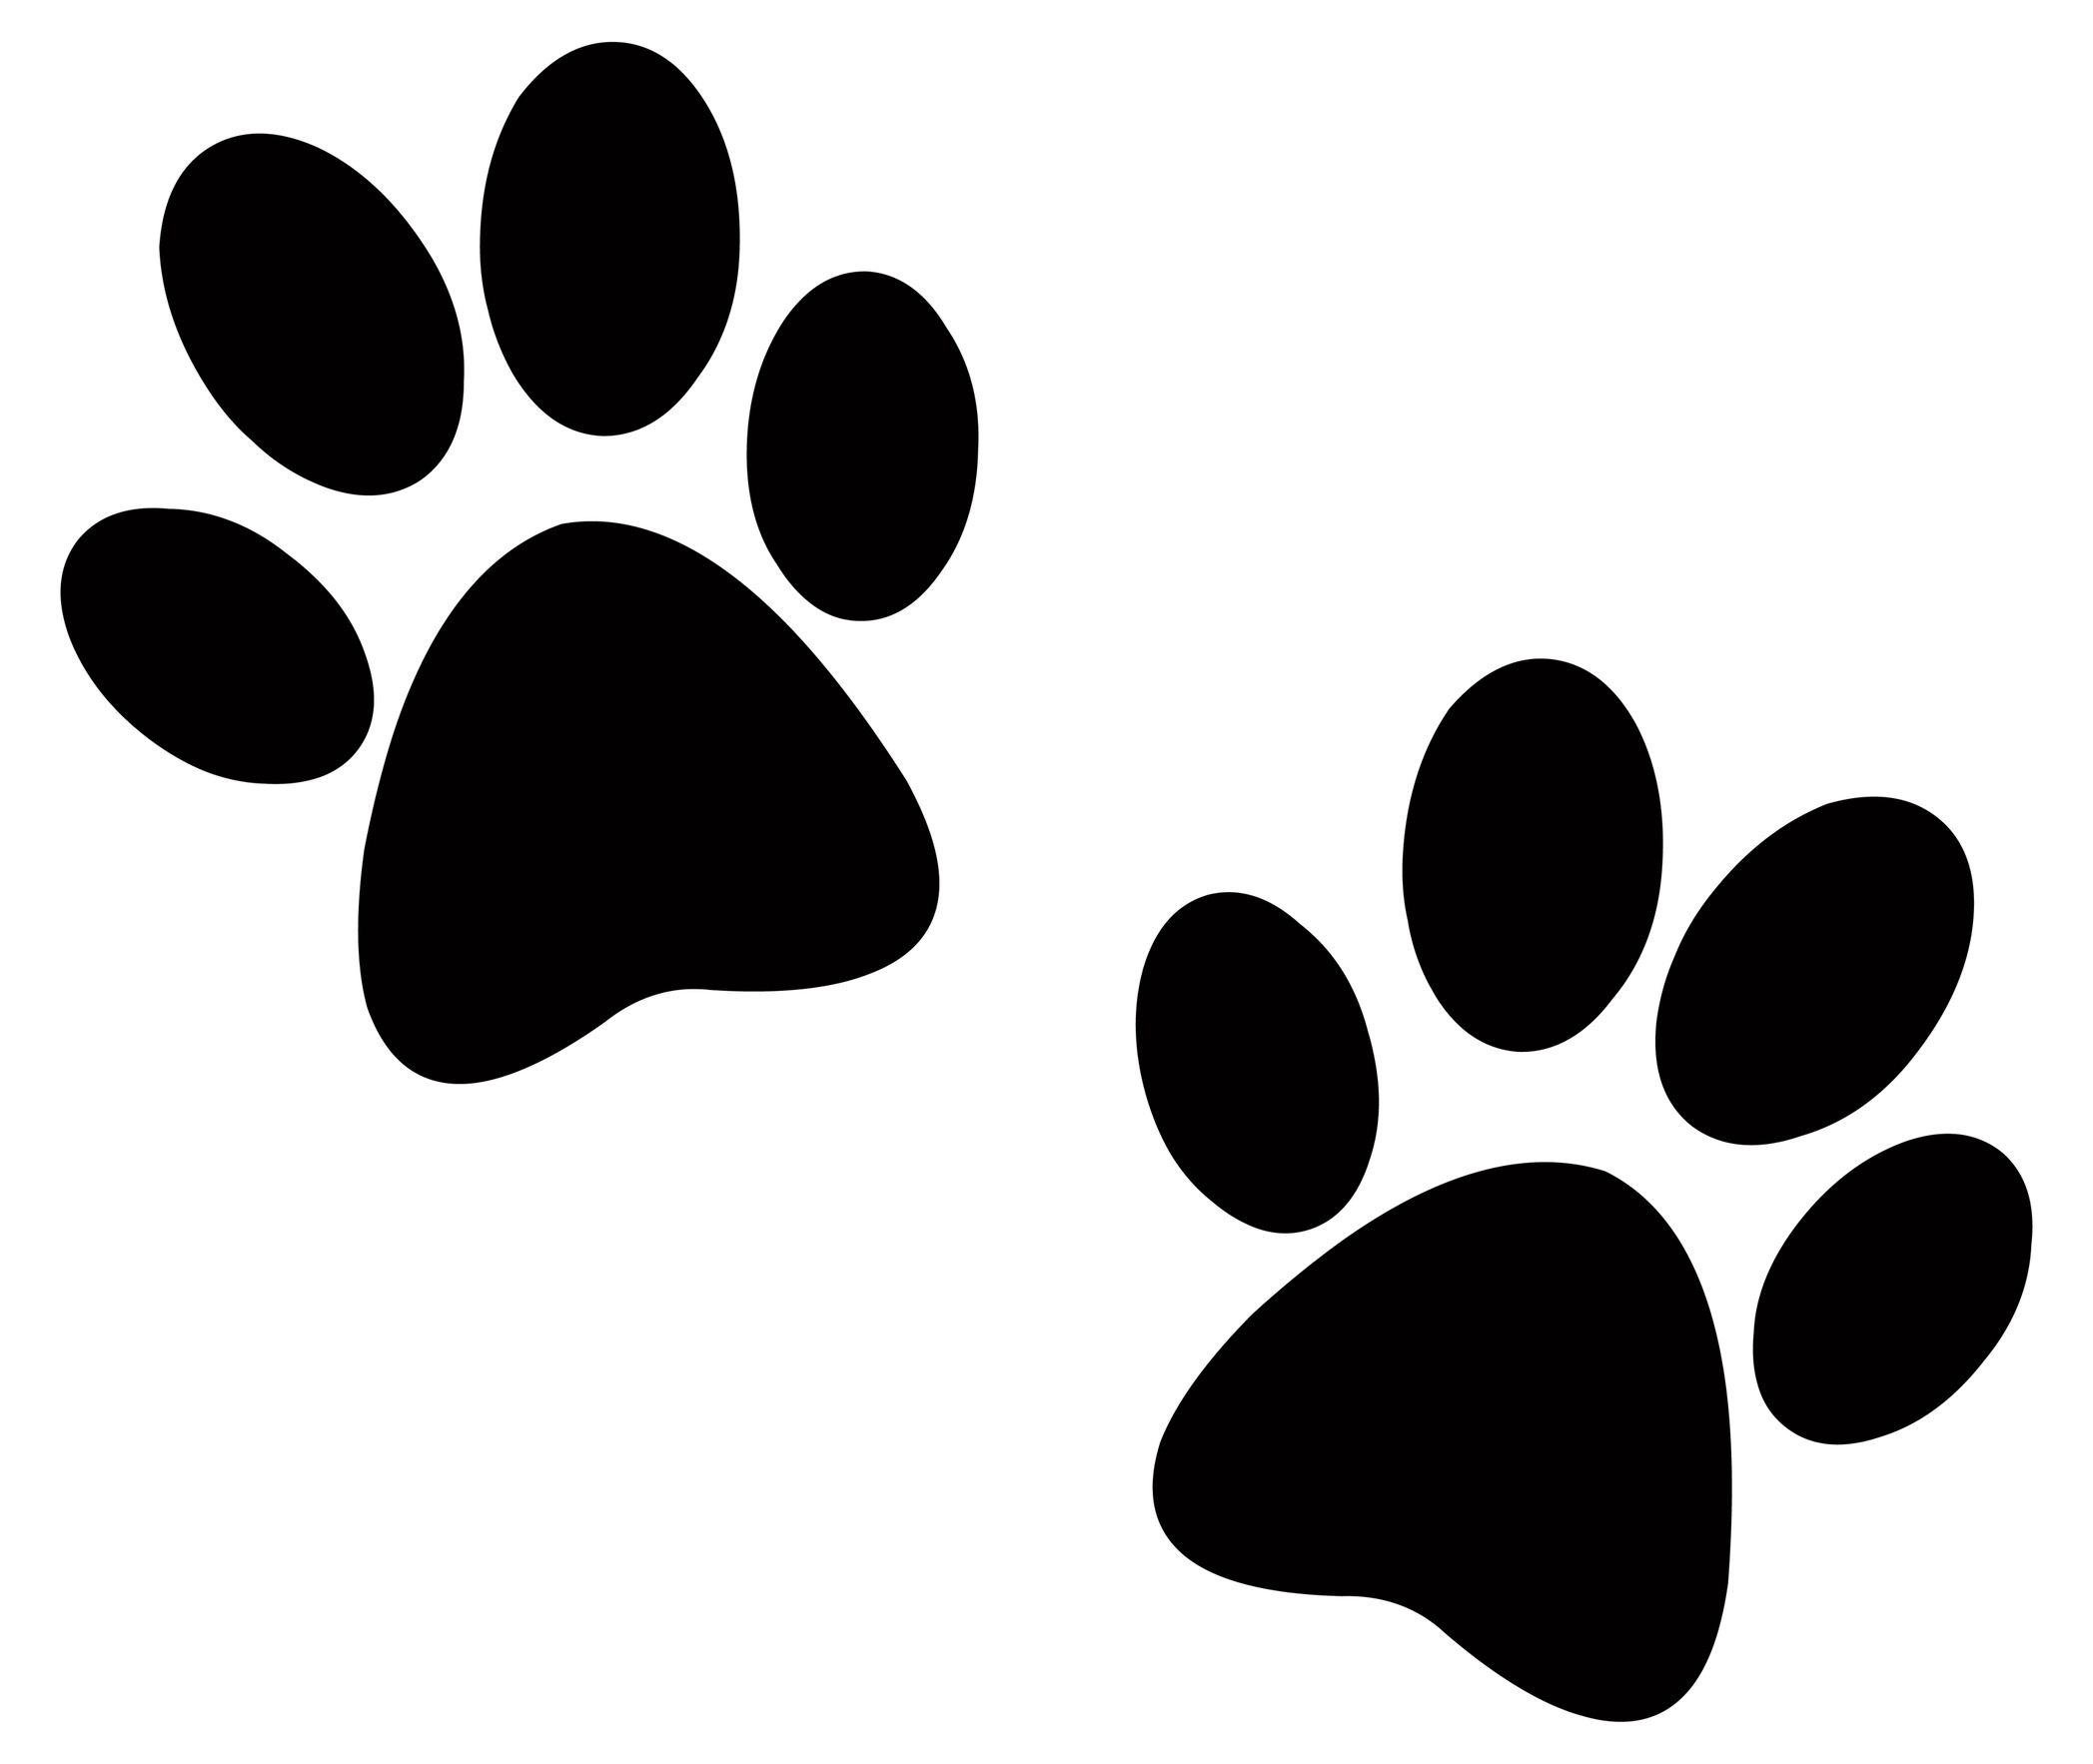 32 Pictures Of Paw Prints   Free Cliparts That You Can Download To You